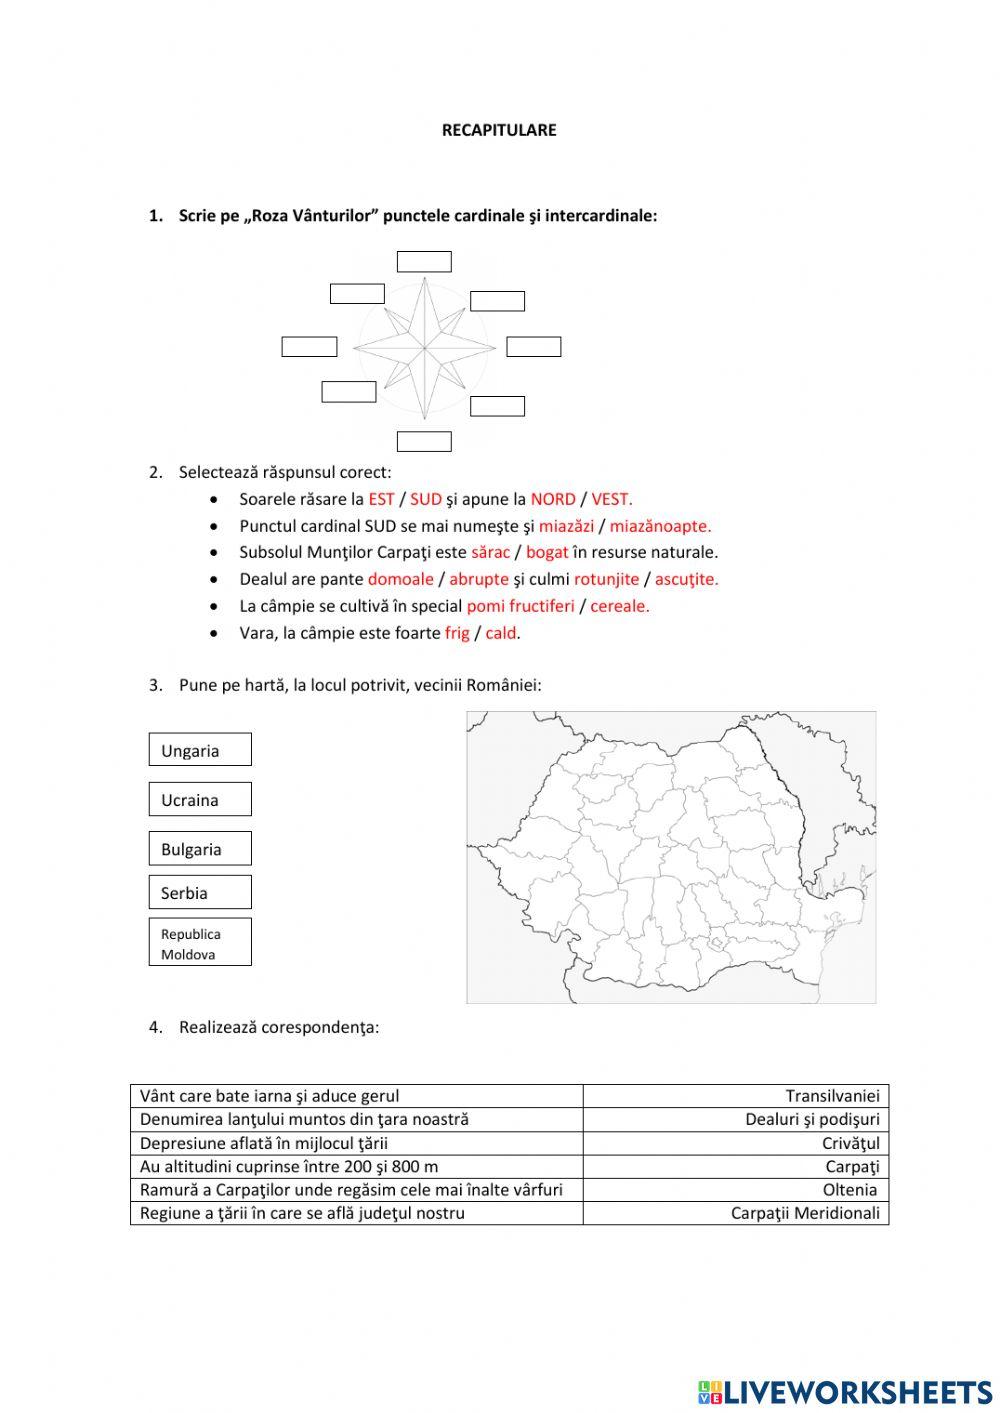 Geografie - Recapitulare online exercise for | Live Worksheets